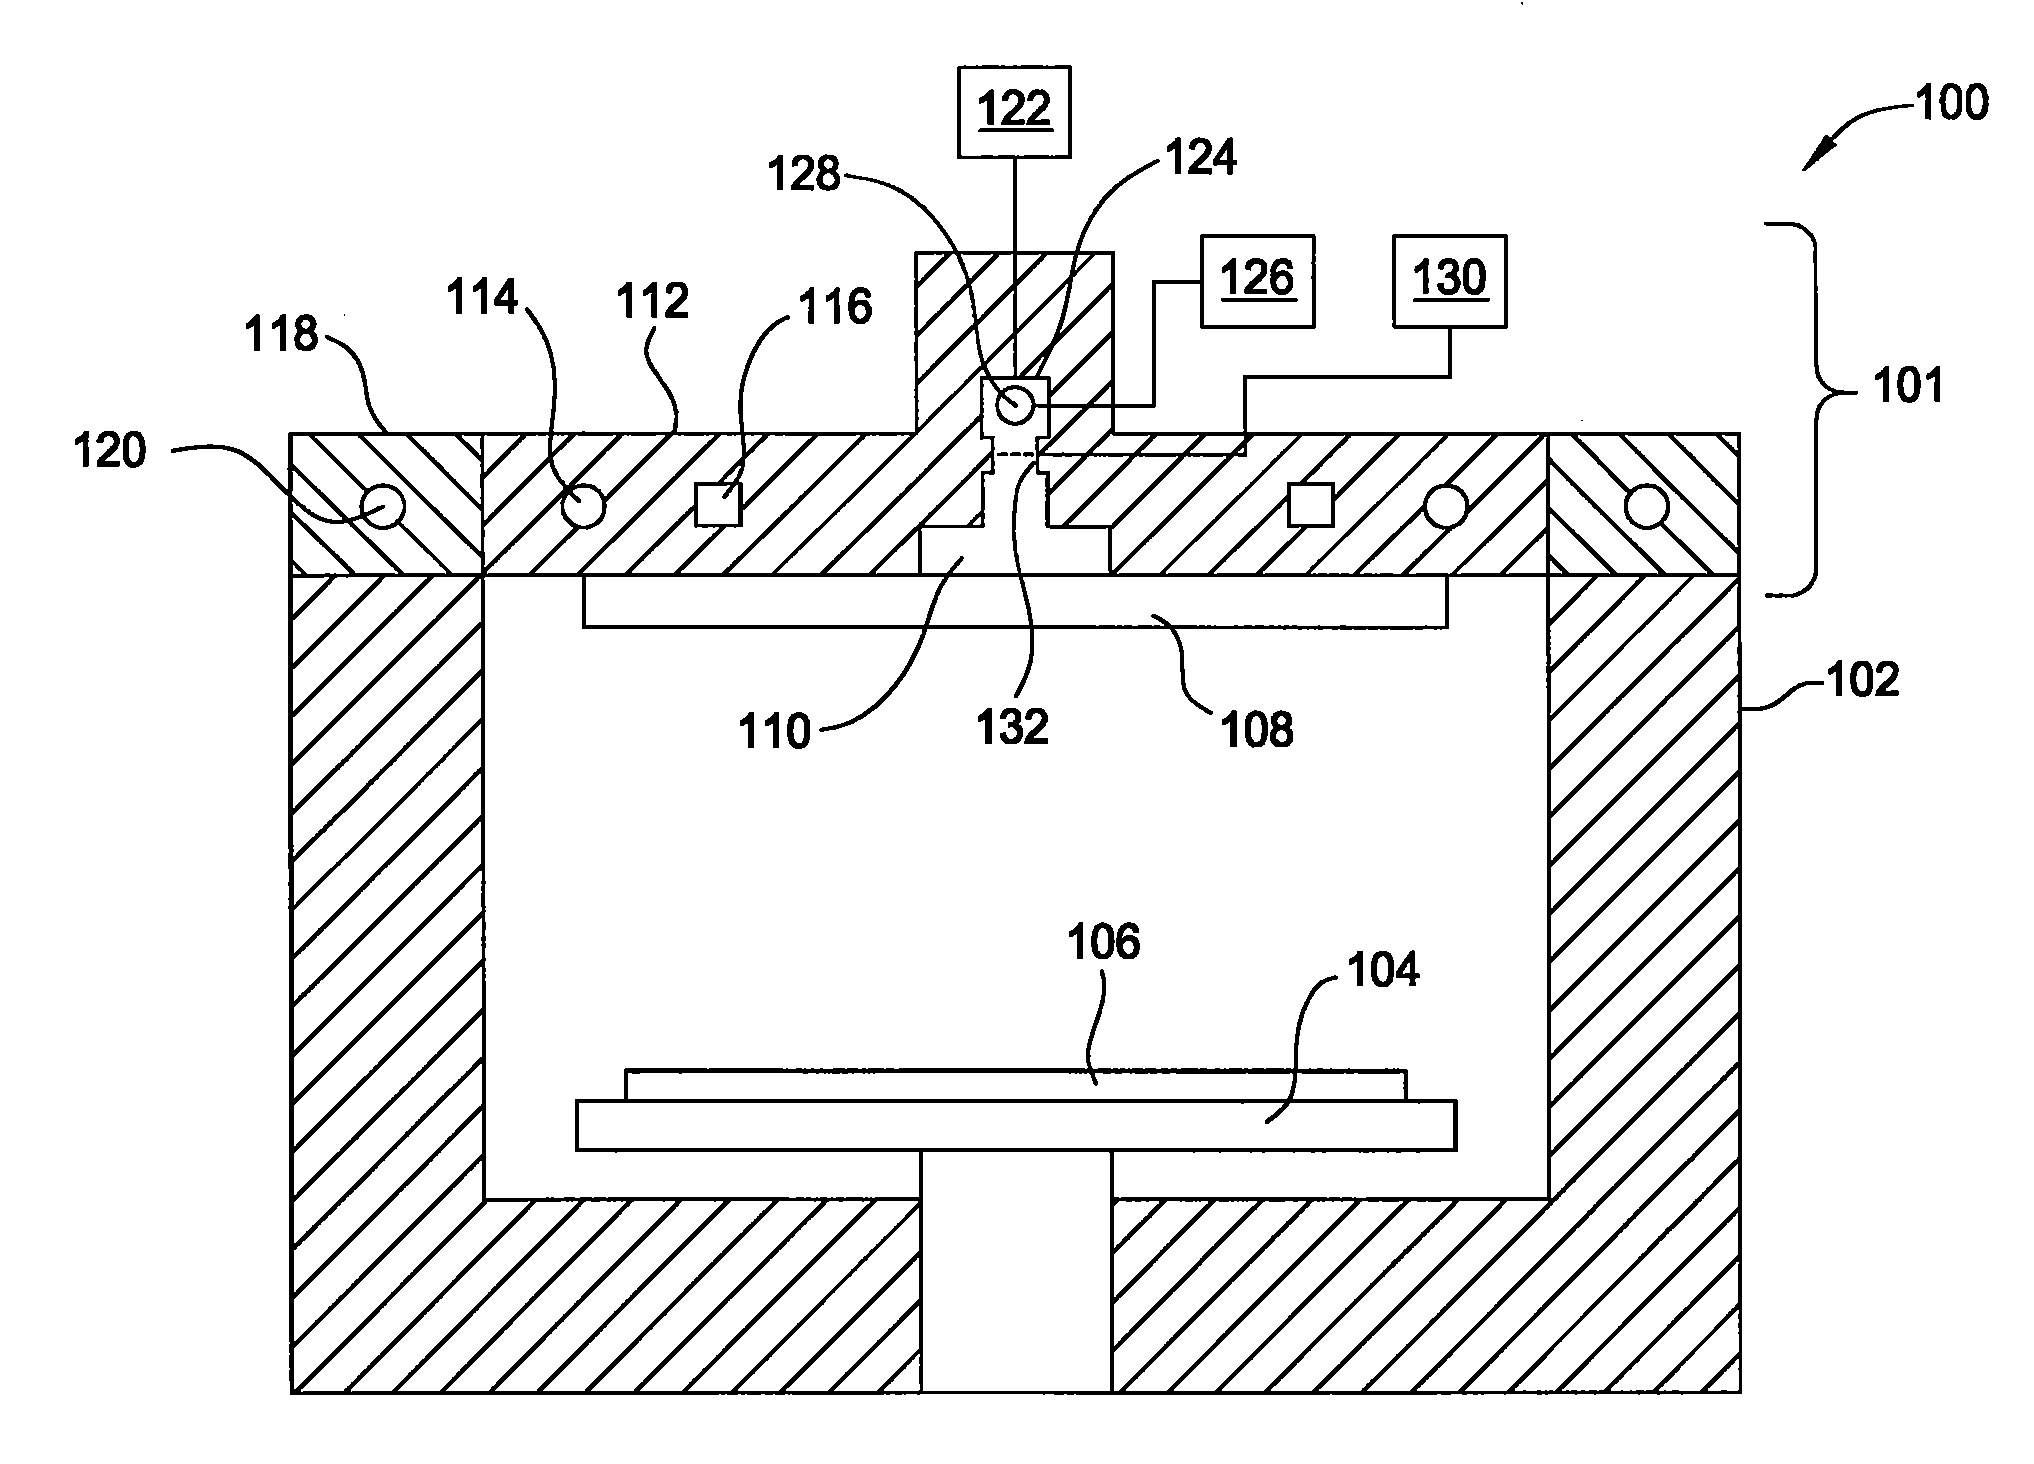 Temperature controlled lid assembly for tungsten nitride deposition